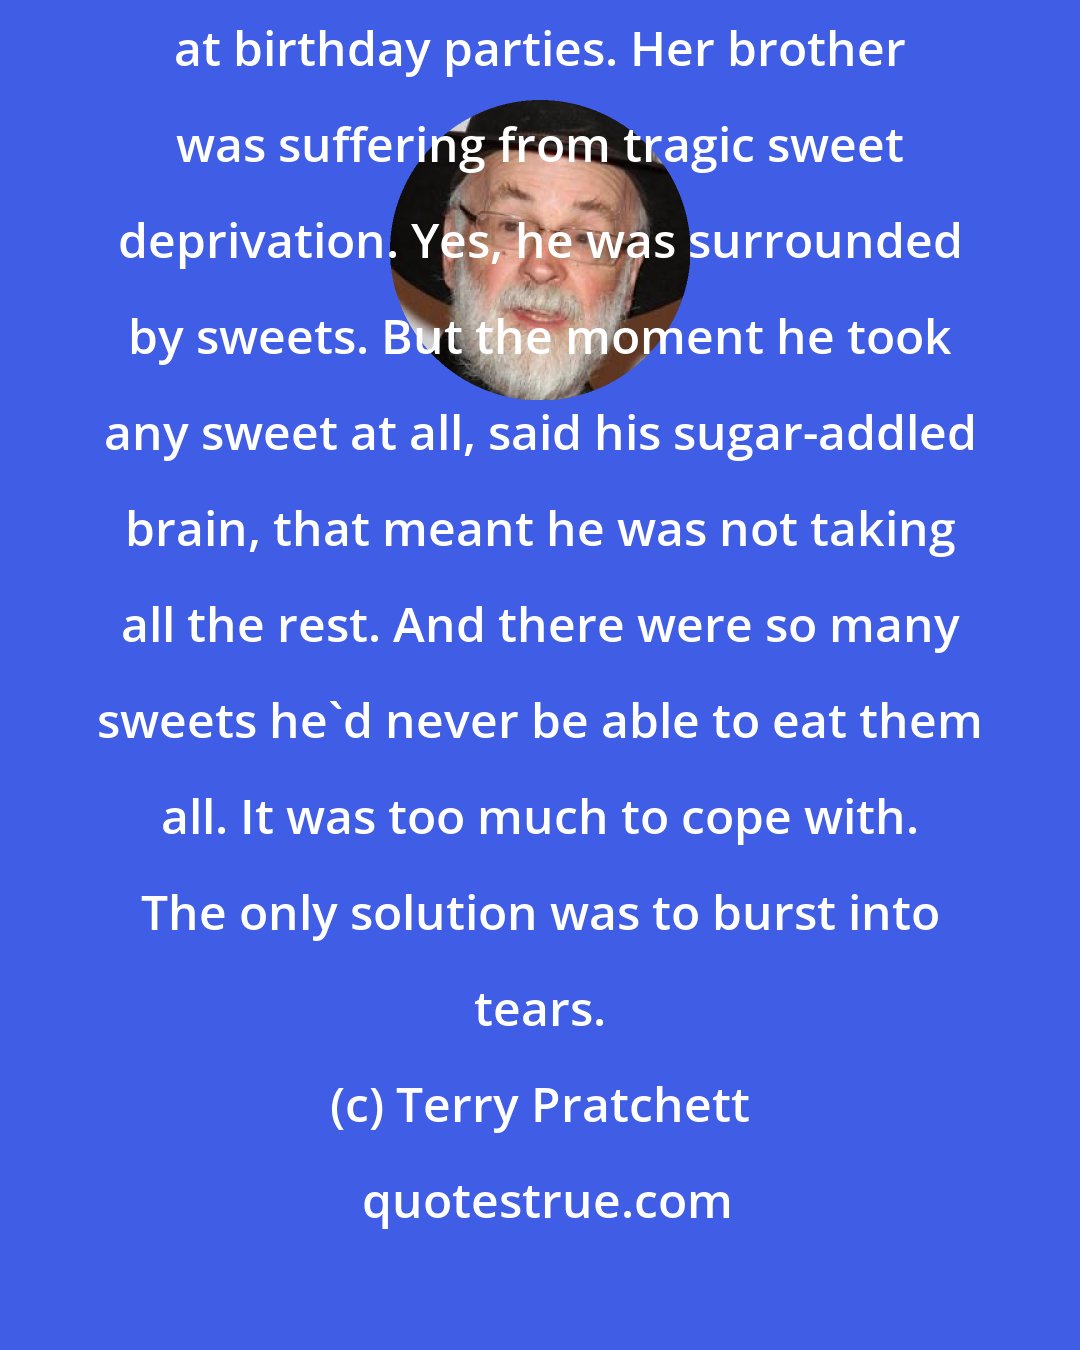 Terry Pratchett: Tiffany knew what the problem was immediately. She'd seen it before, at birthday parties. Her brother was suffering from tragic sweet deprivation. Yes, he was surrounded by sweets. But the moment he took any sweet at all, said his sugar-addled brain, that meant he was not taking all the rest. And there were so many sweets he'd never be able to eat them all. It was too much to cope with. The only solution was to burst into tears.